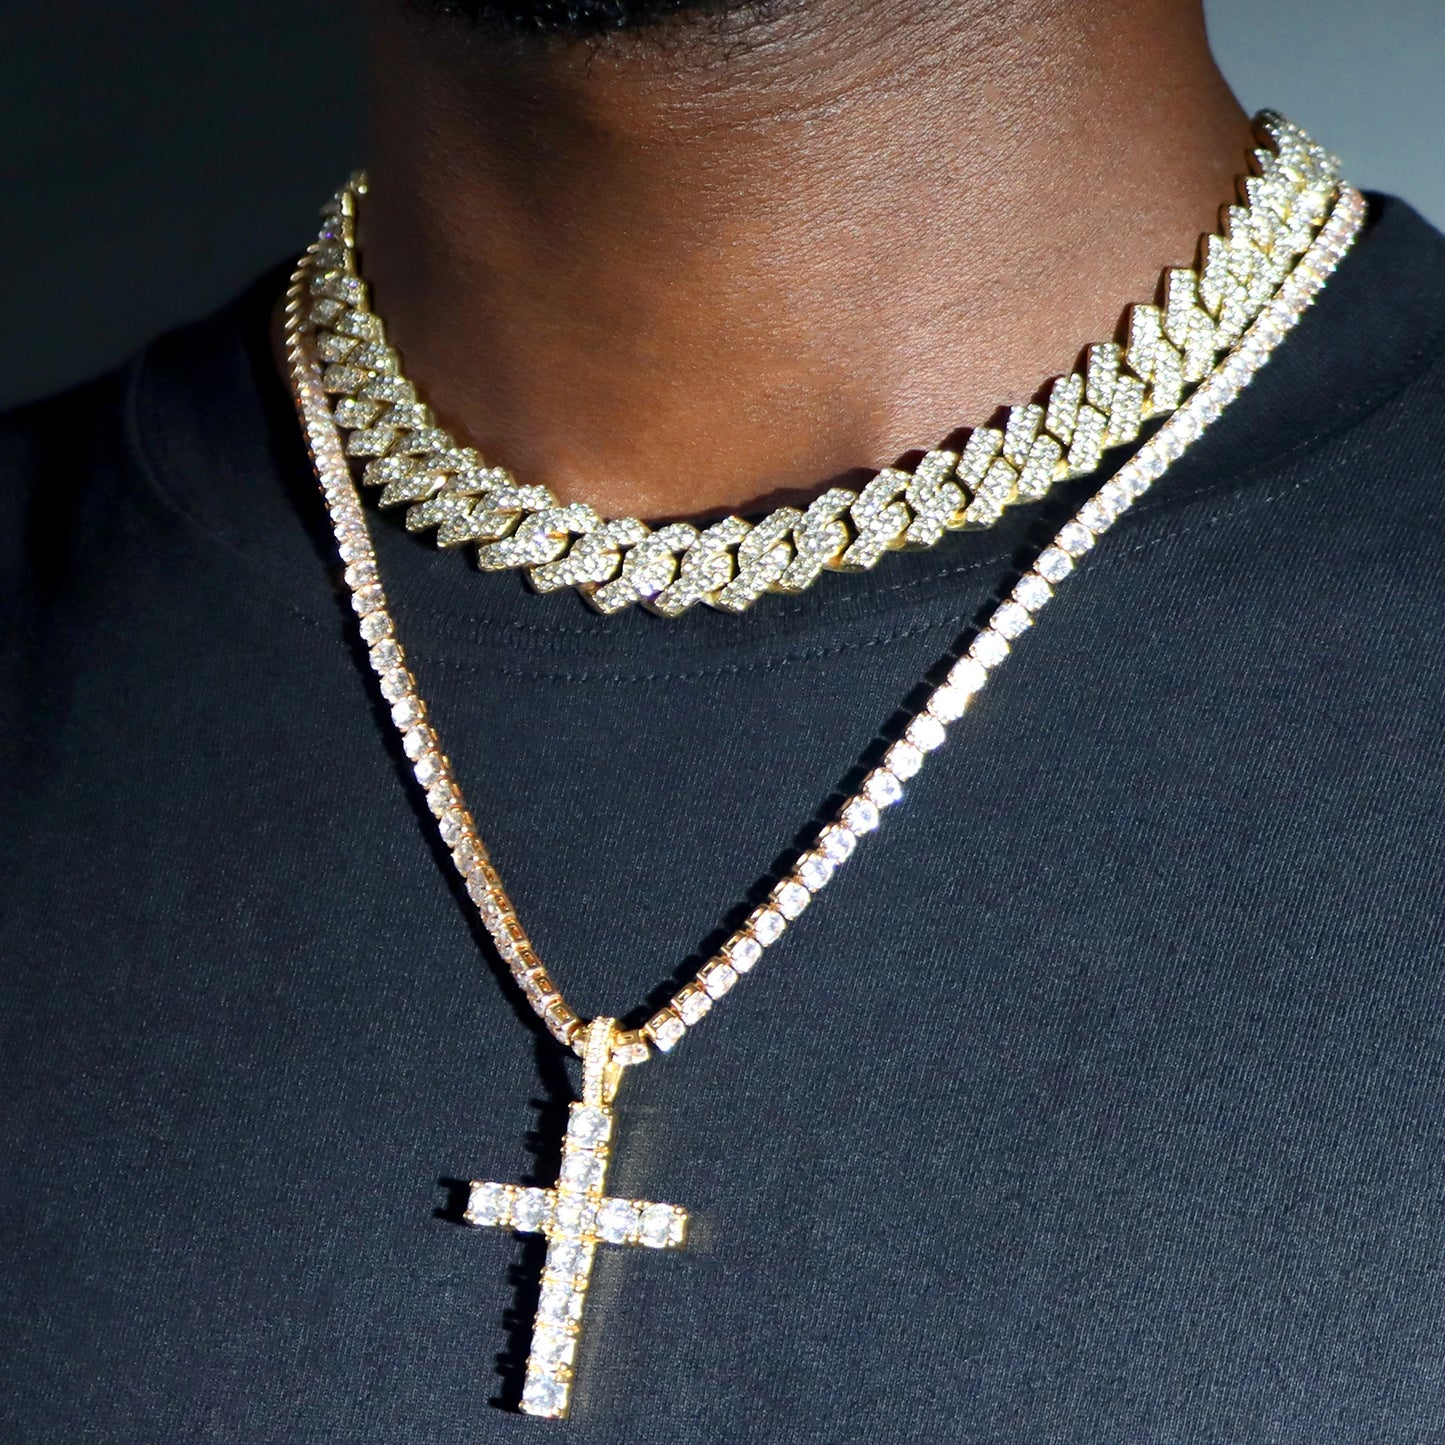 2 Piece 14mm Iced Out Christian Pendant With Cuban Link Chain